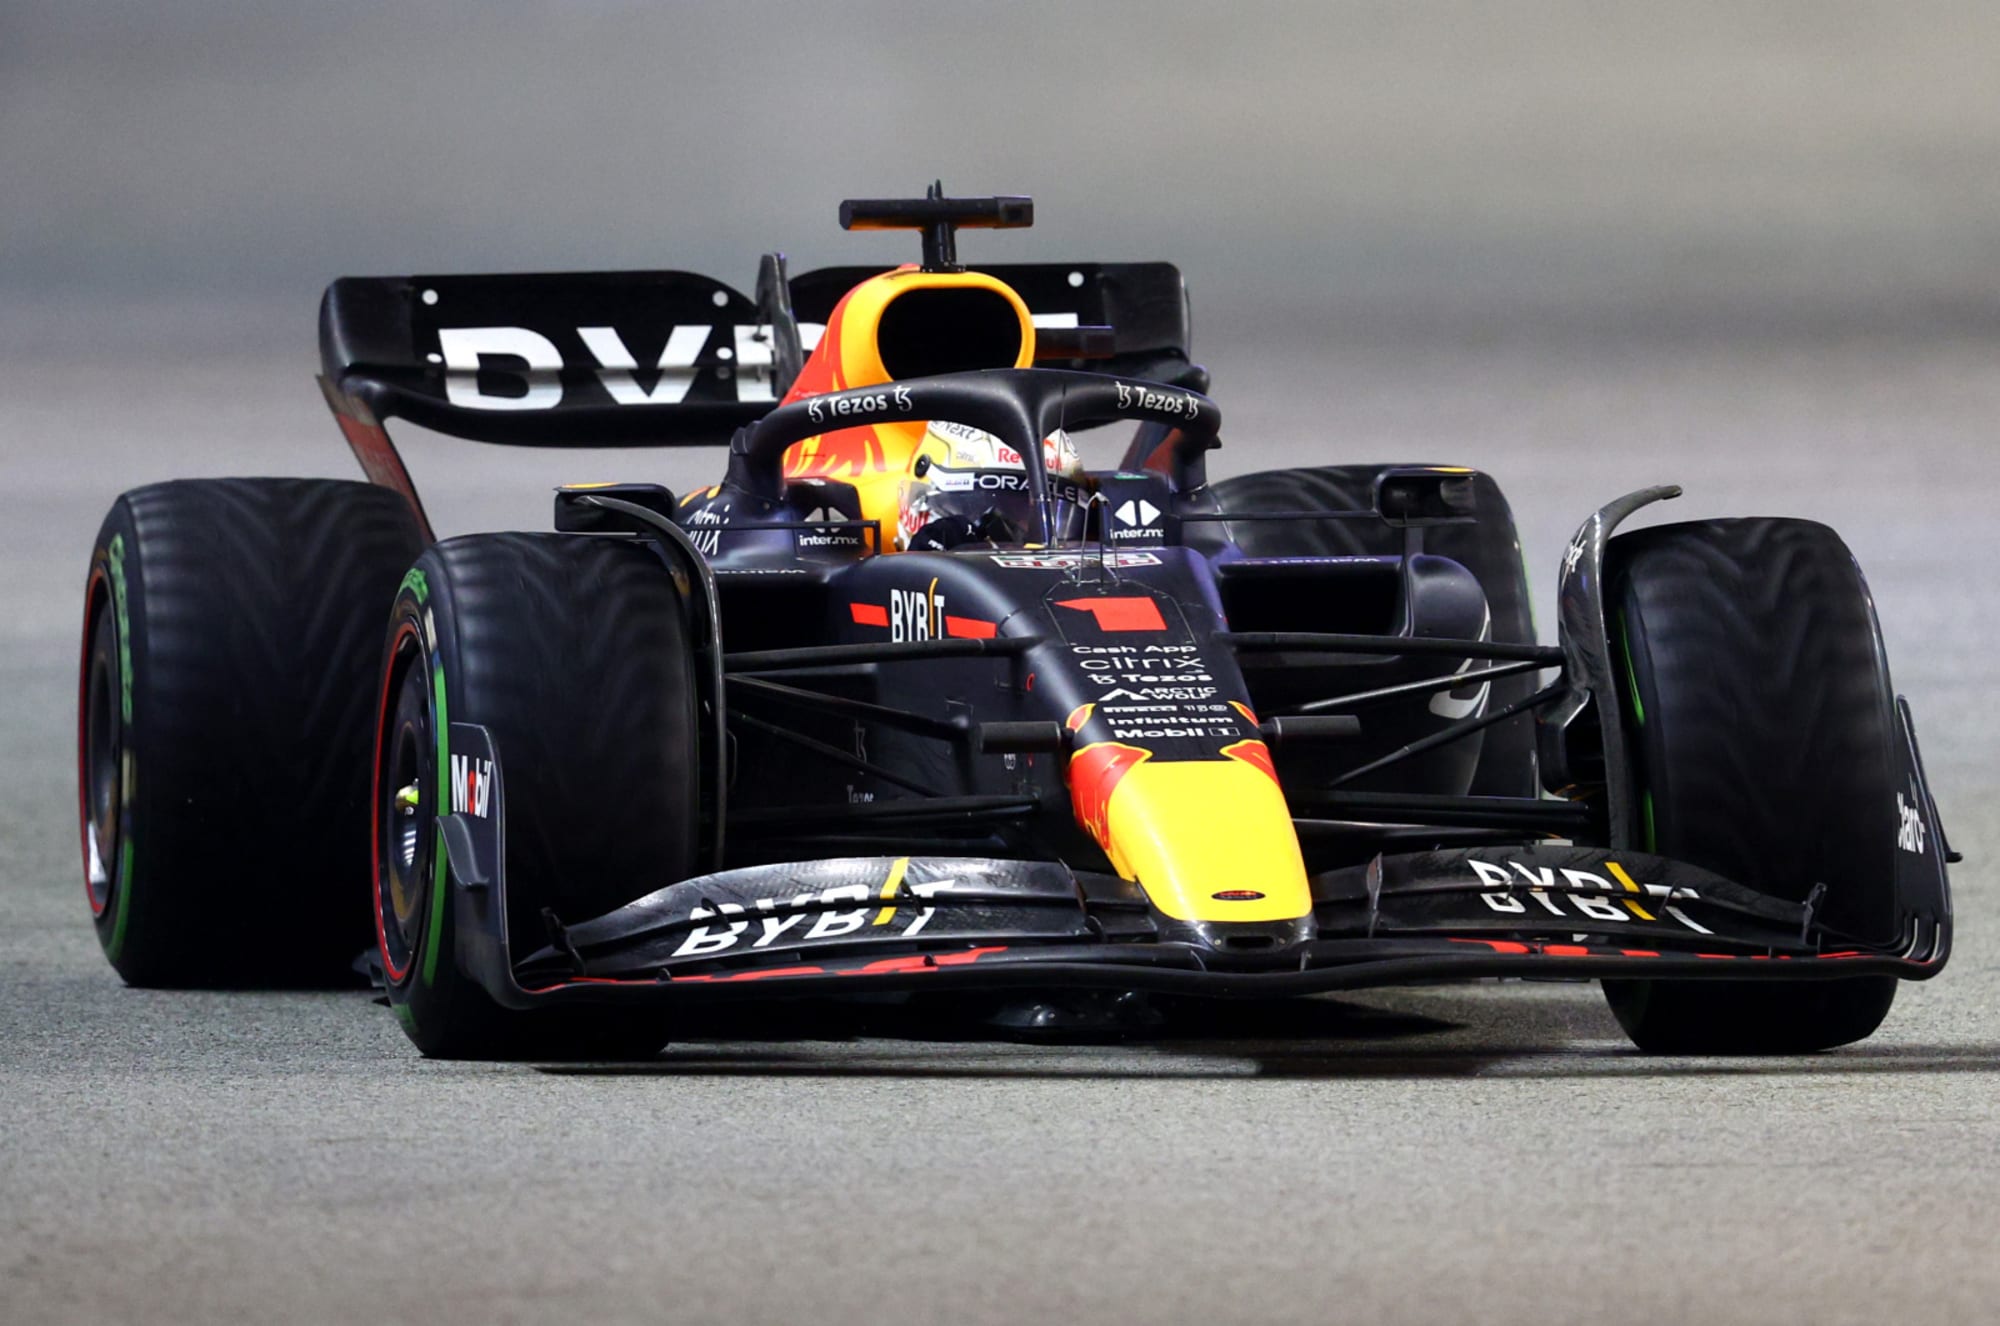 Formula 1: Why is Max Verstappen excluded from championship odds?